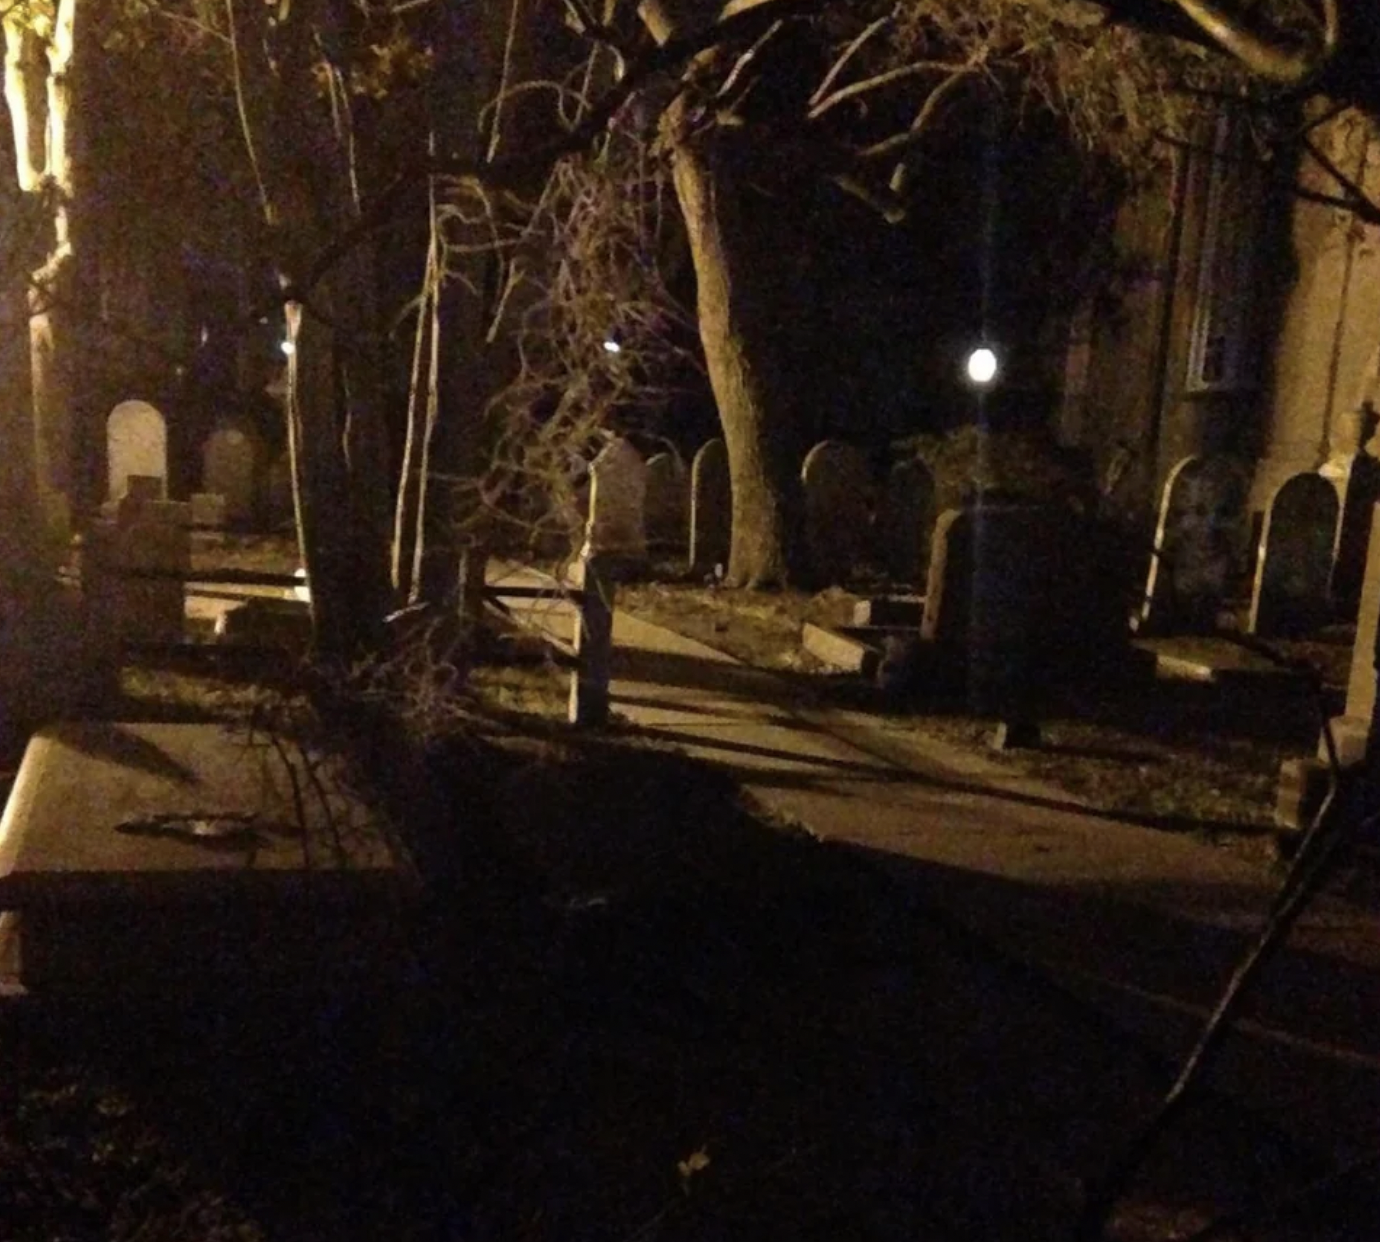 Taken in an old historic cemetery next to a church, you can see a face on the tombstone on the far right of the photo. Never noticed it until my friend was looking at the pictures I took from my trip and pointed it out to me!